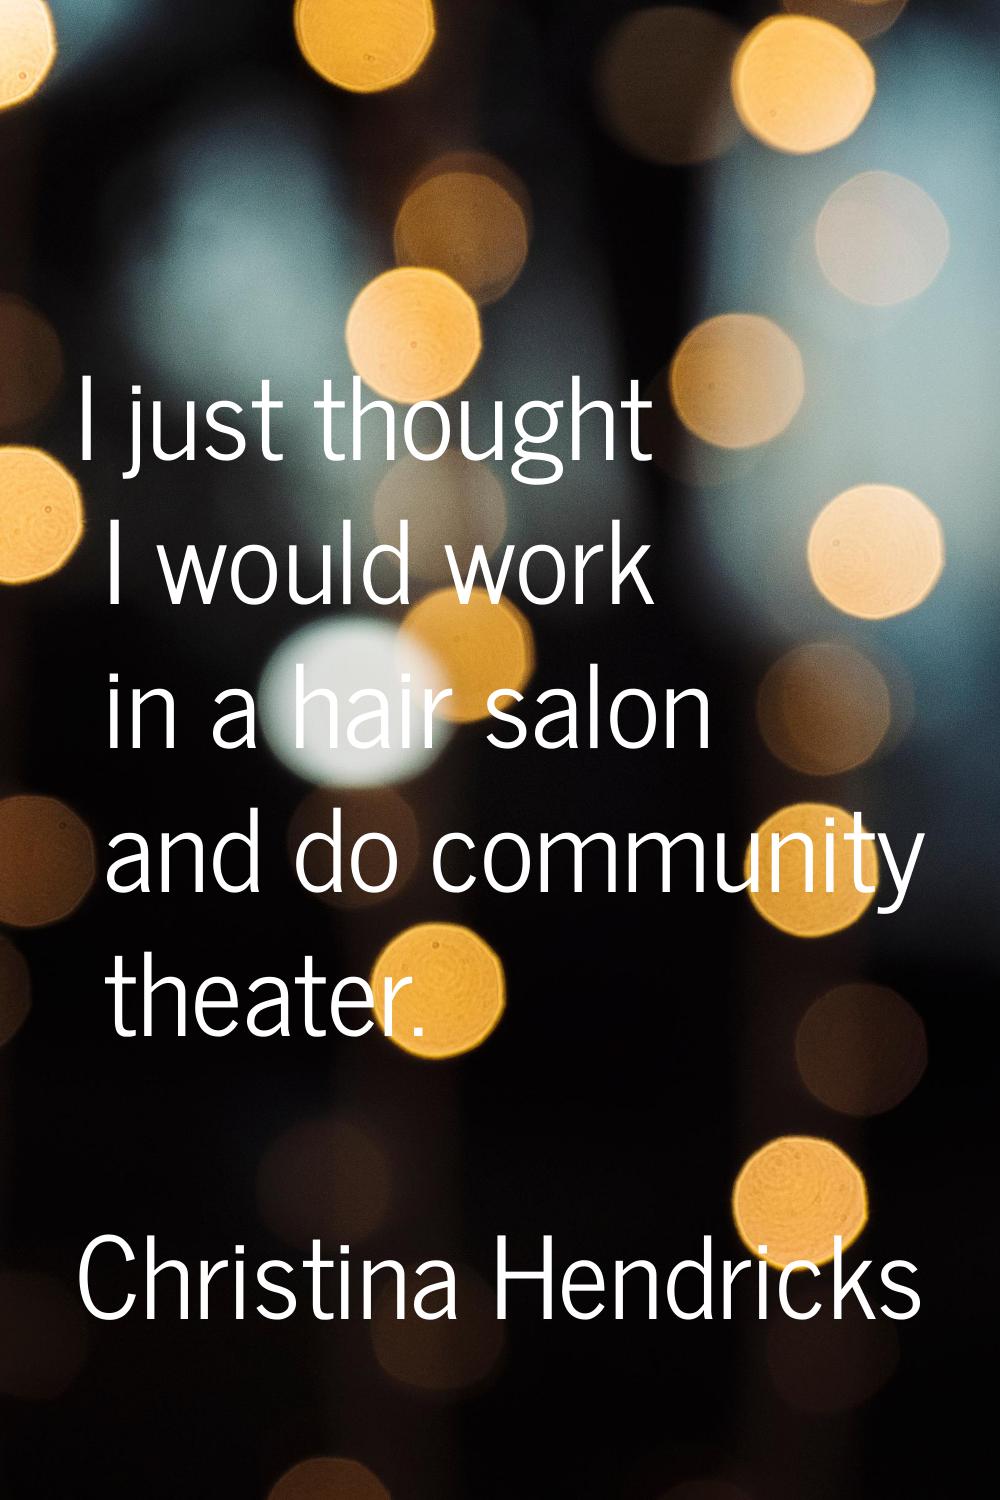 I just thought I would work in a hair salon and do community theater.